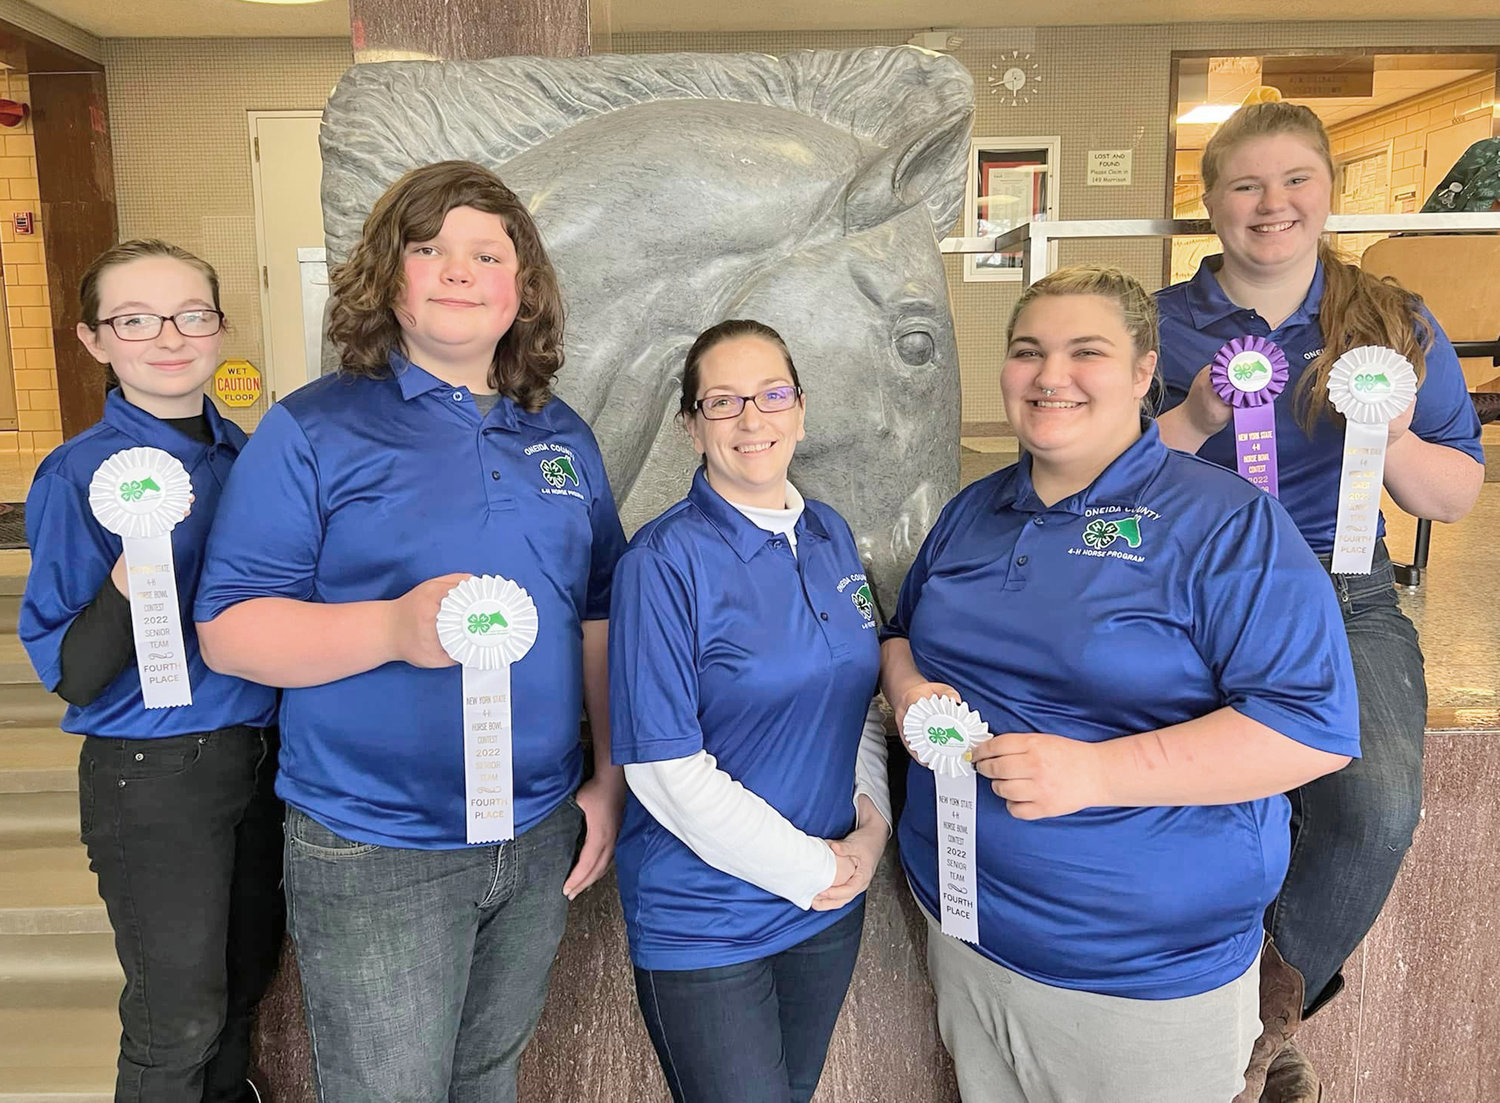 HORSE SENSE — Senior 4-H members Selby Young, Jacob Buck, Lanelle Vile, and Alyssa Buck  represented Oneida County in the recent 4-H Horse Bowl. The team placed fourth overall out of nine teams.